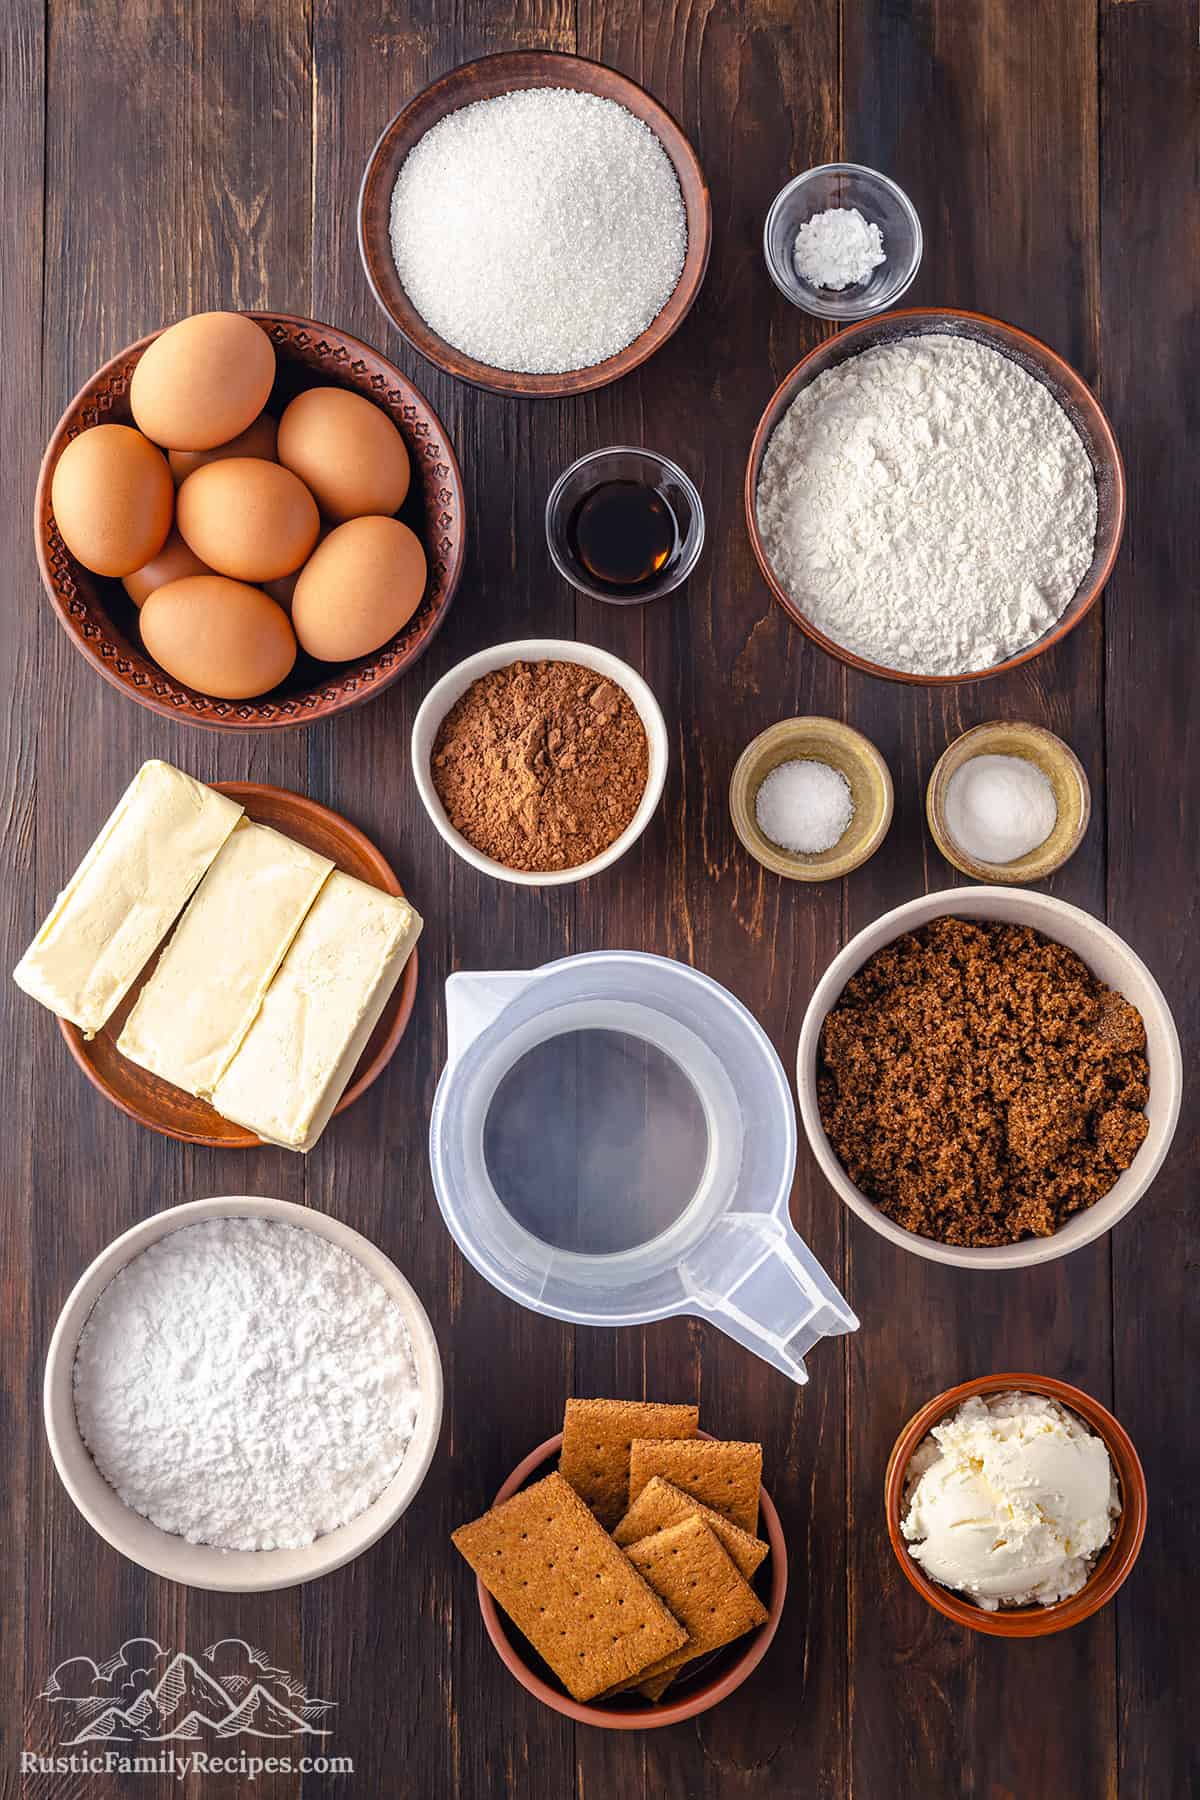 Ingredients for the s'mores cake.